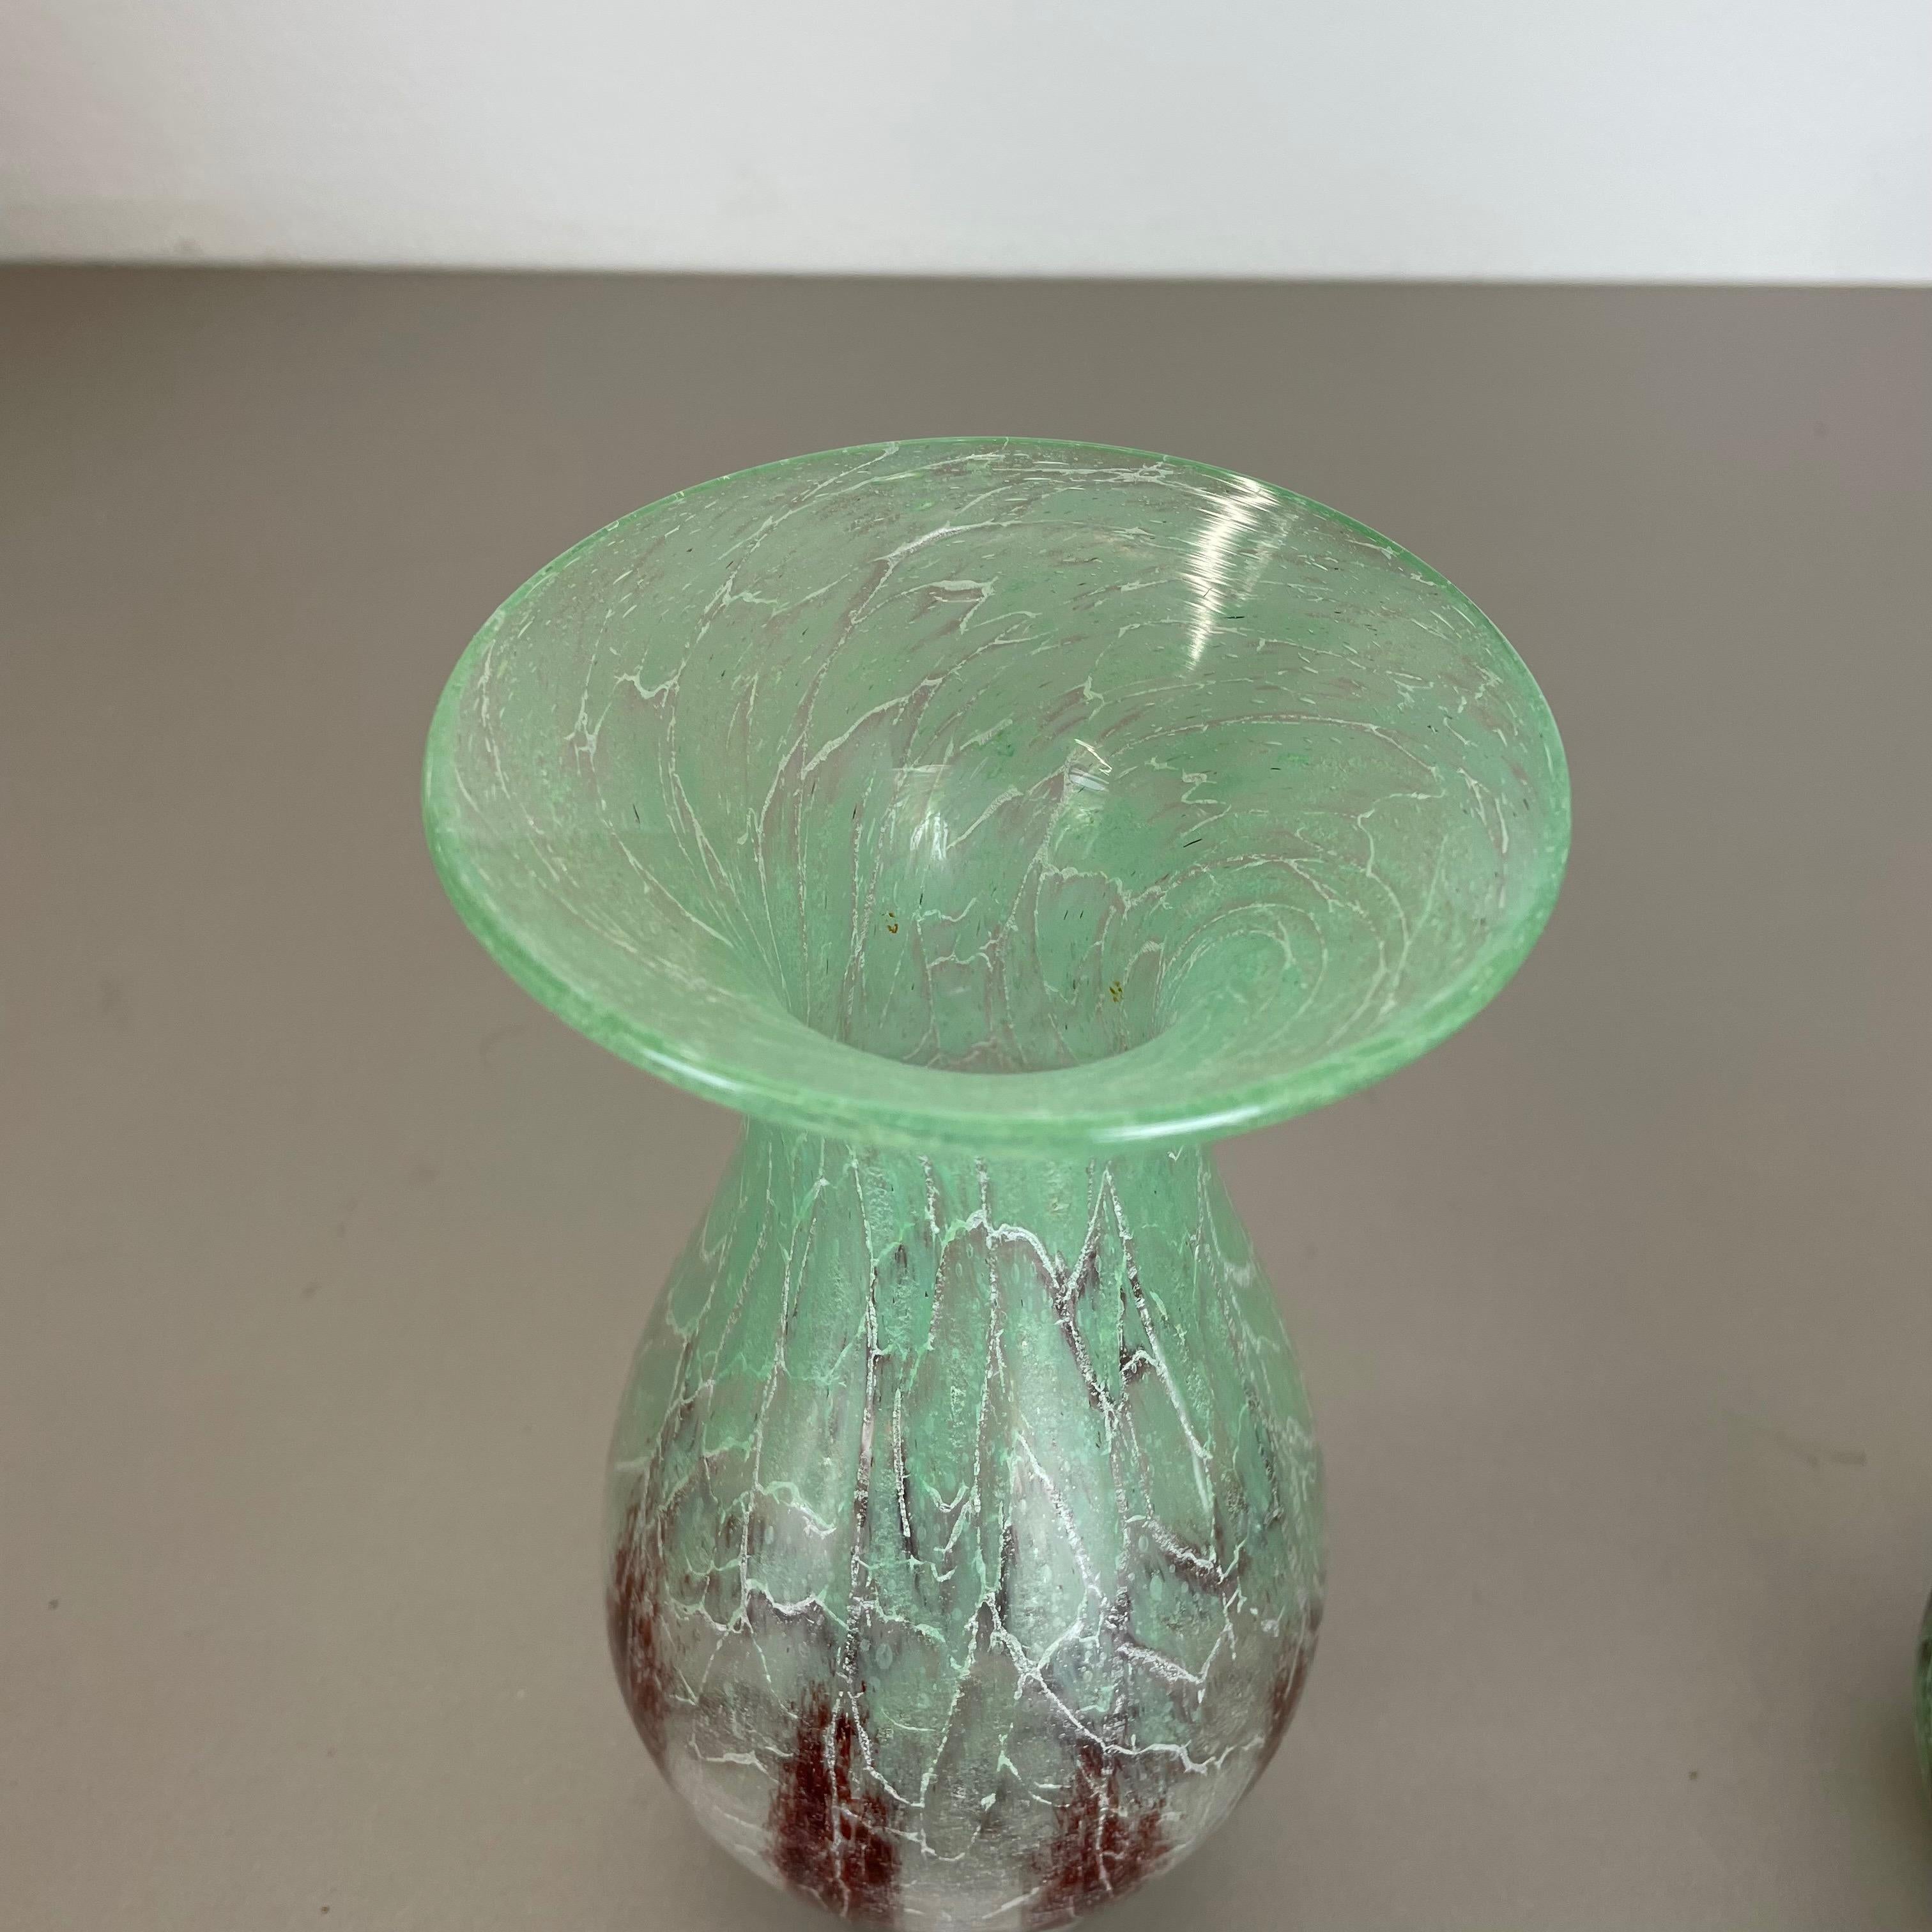 20th Century Set of 2 Ikora Glass Vases by Karl Wiedmann for WMF Germany, 1930s Bauhaus For Sale